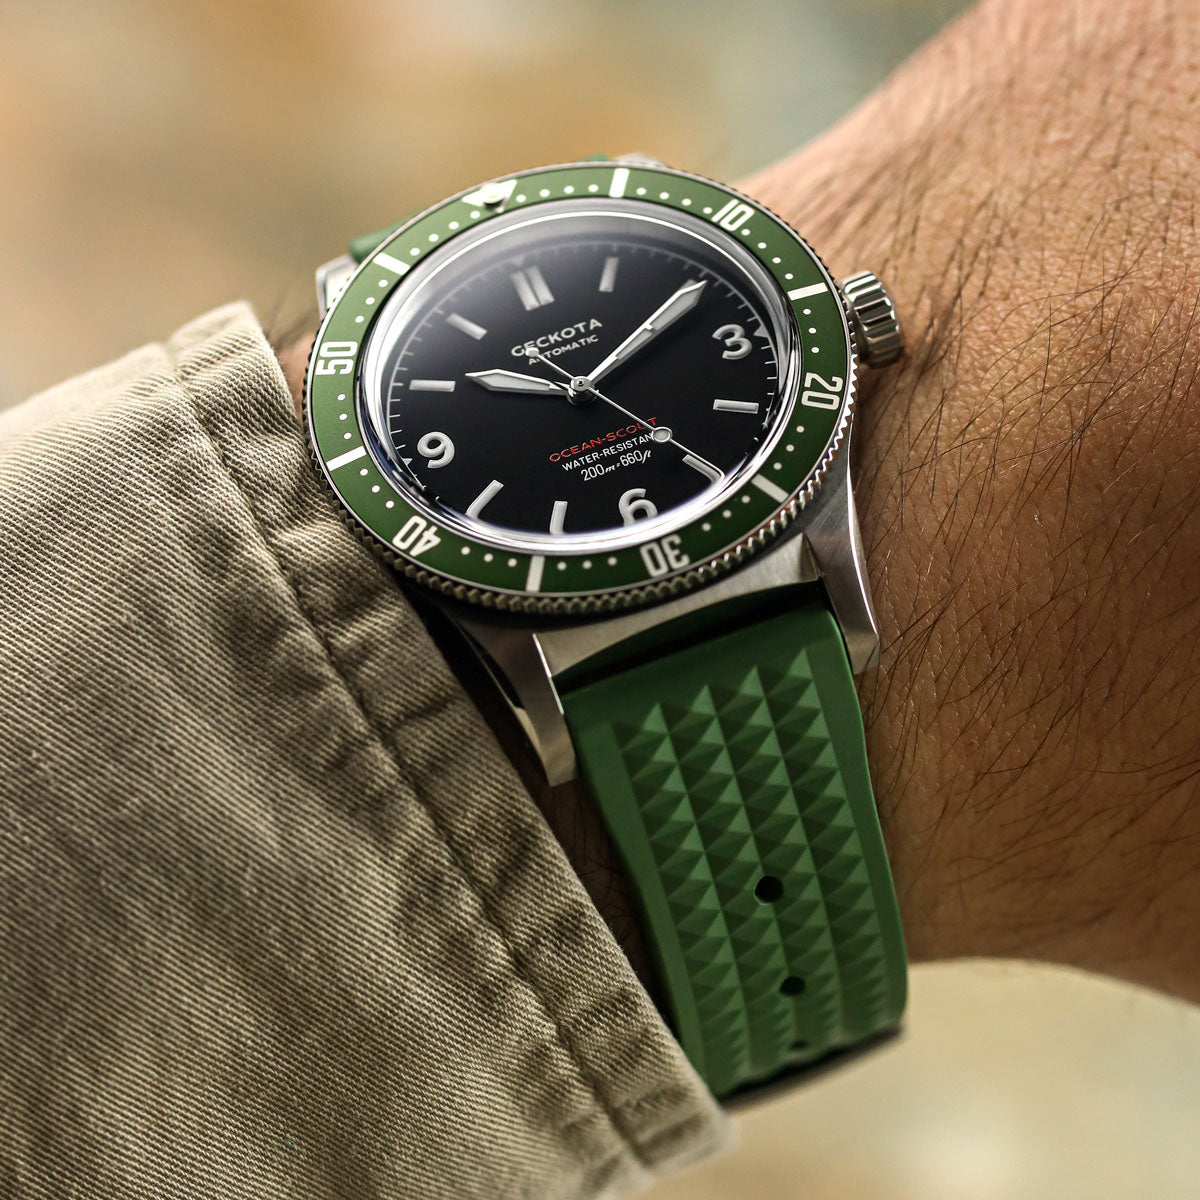 Seacroft Waffle FKM Rubber Dive Watch Strap - Green - additional image 2